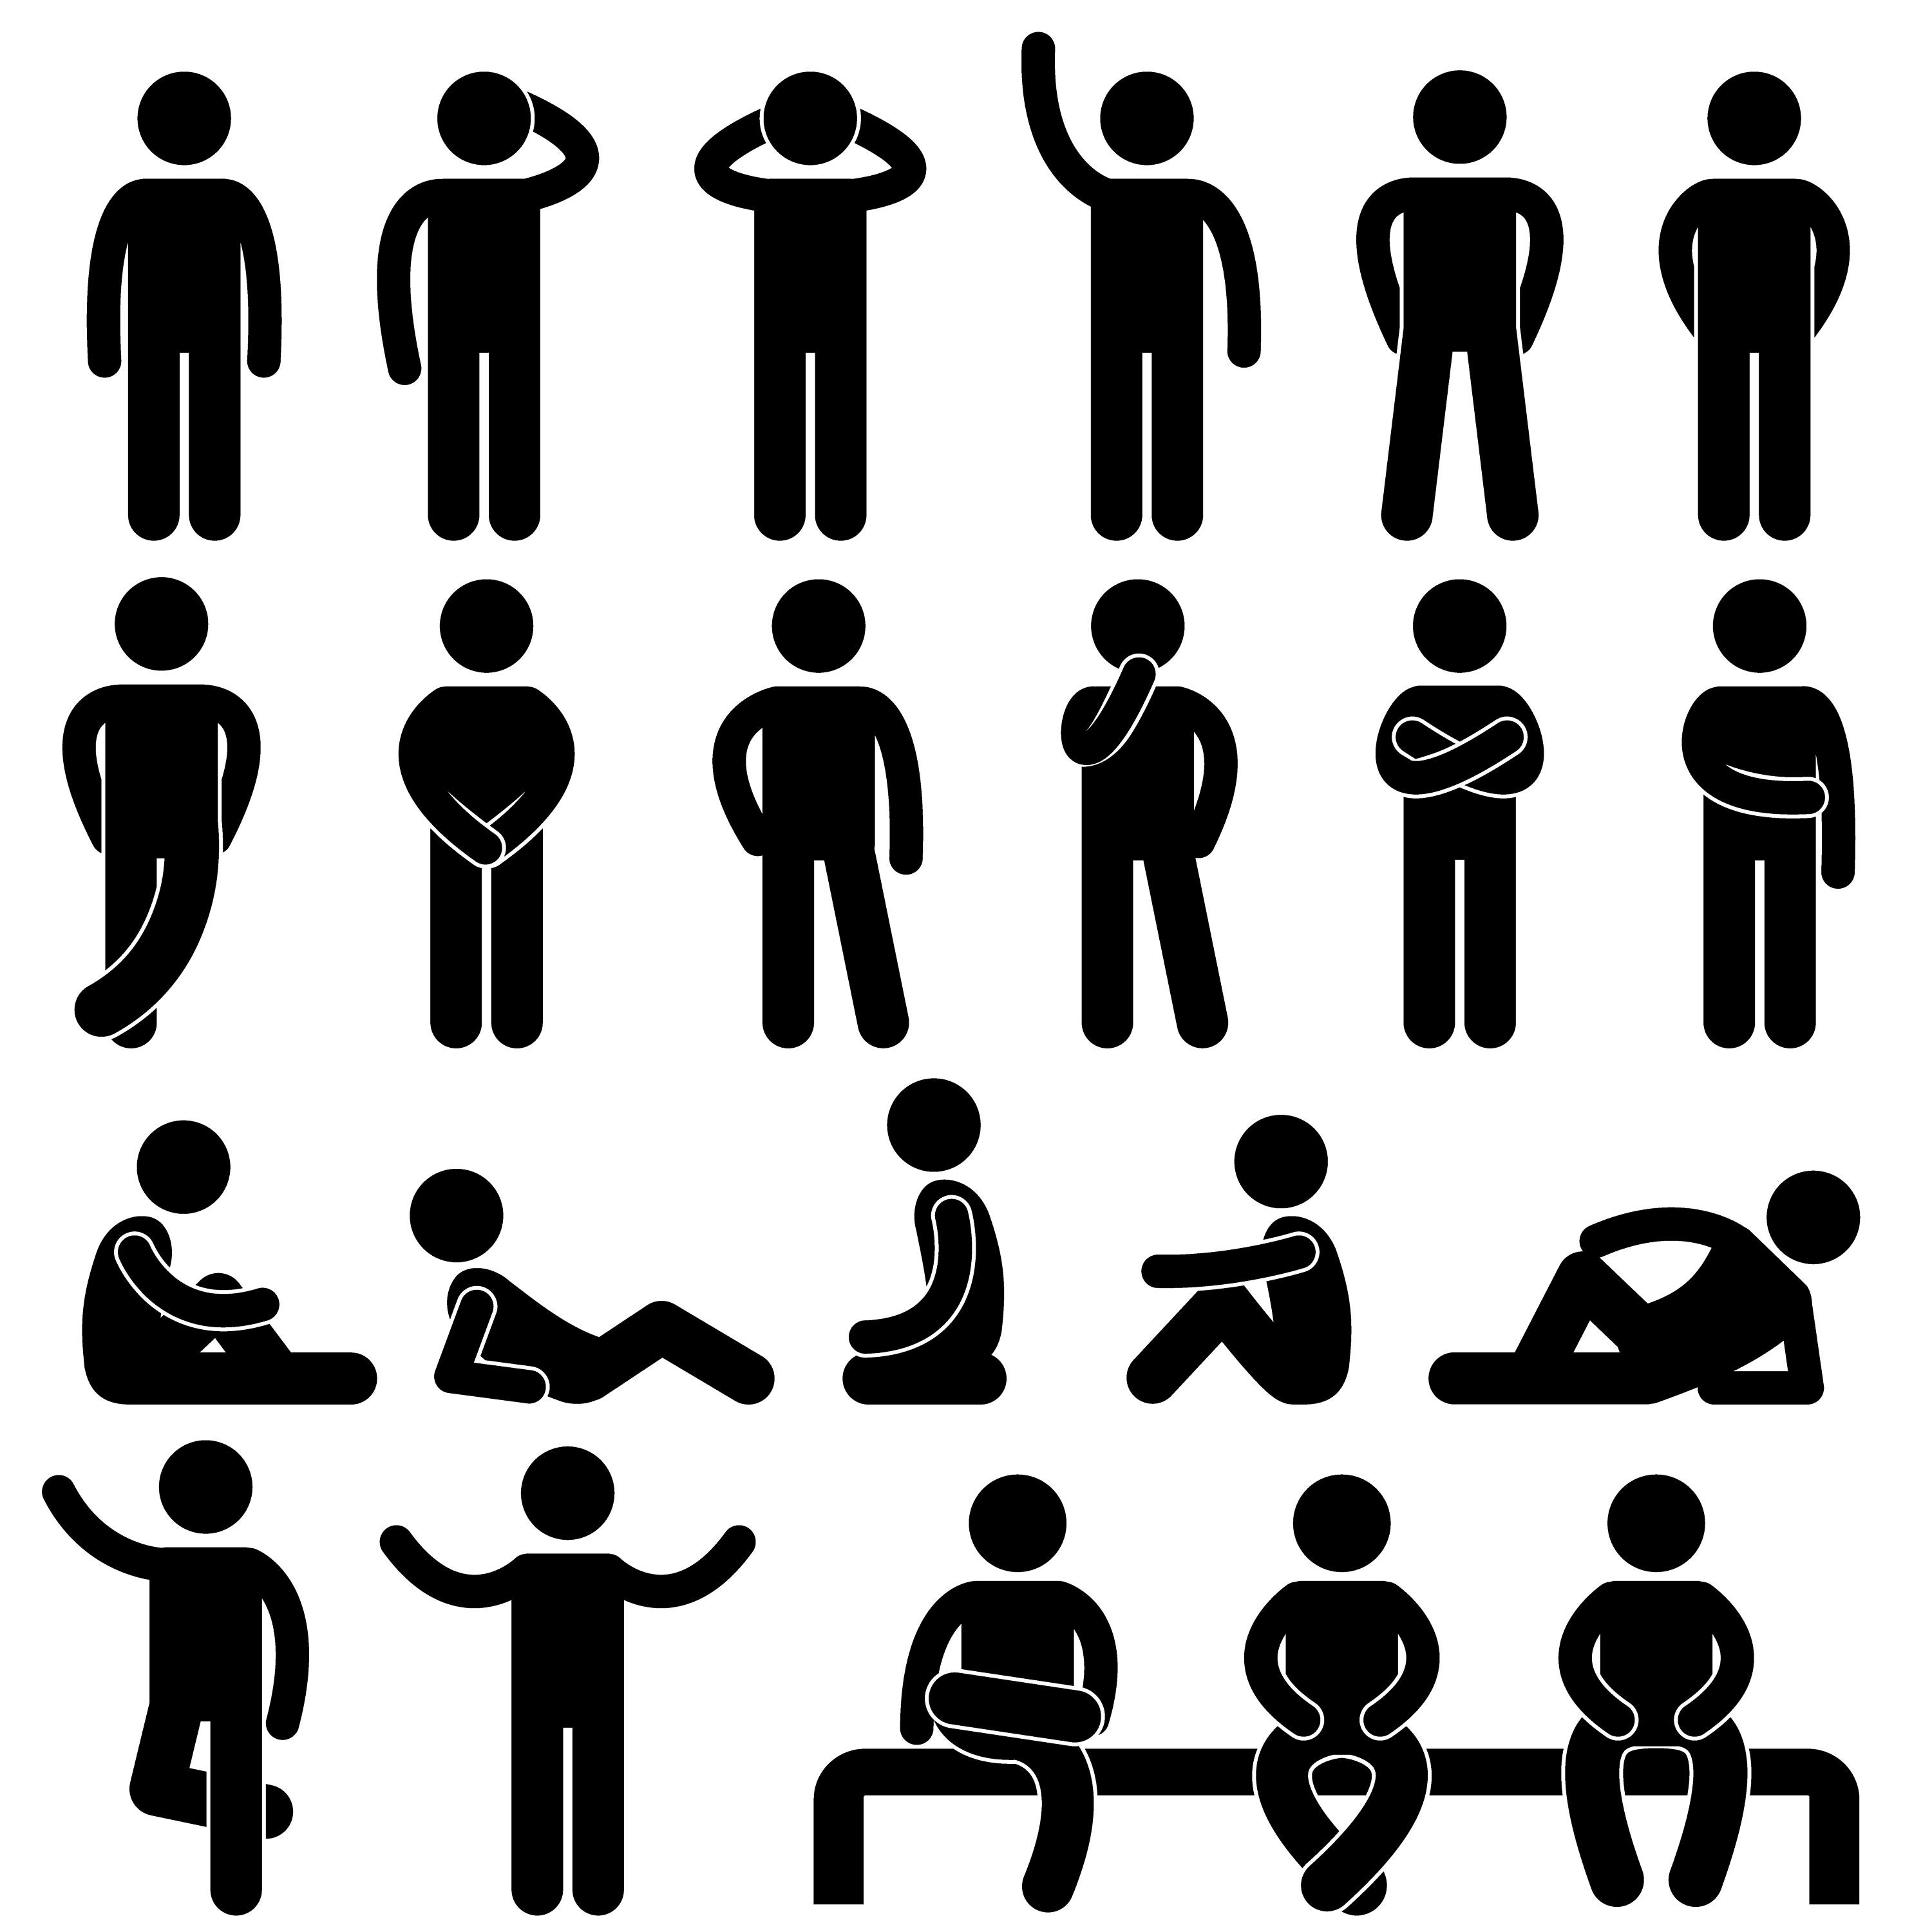 Human Action Poses Stick Figure Pictogram Stock Vector (Royalty Free)  325861253 | Shutterstock